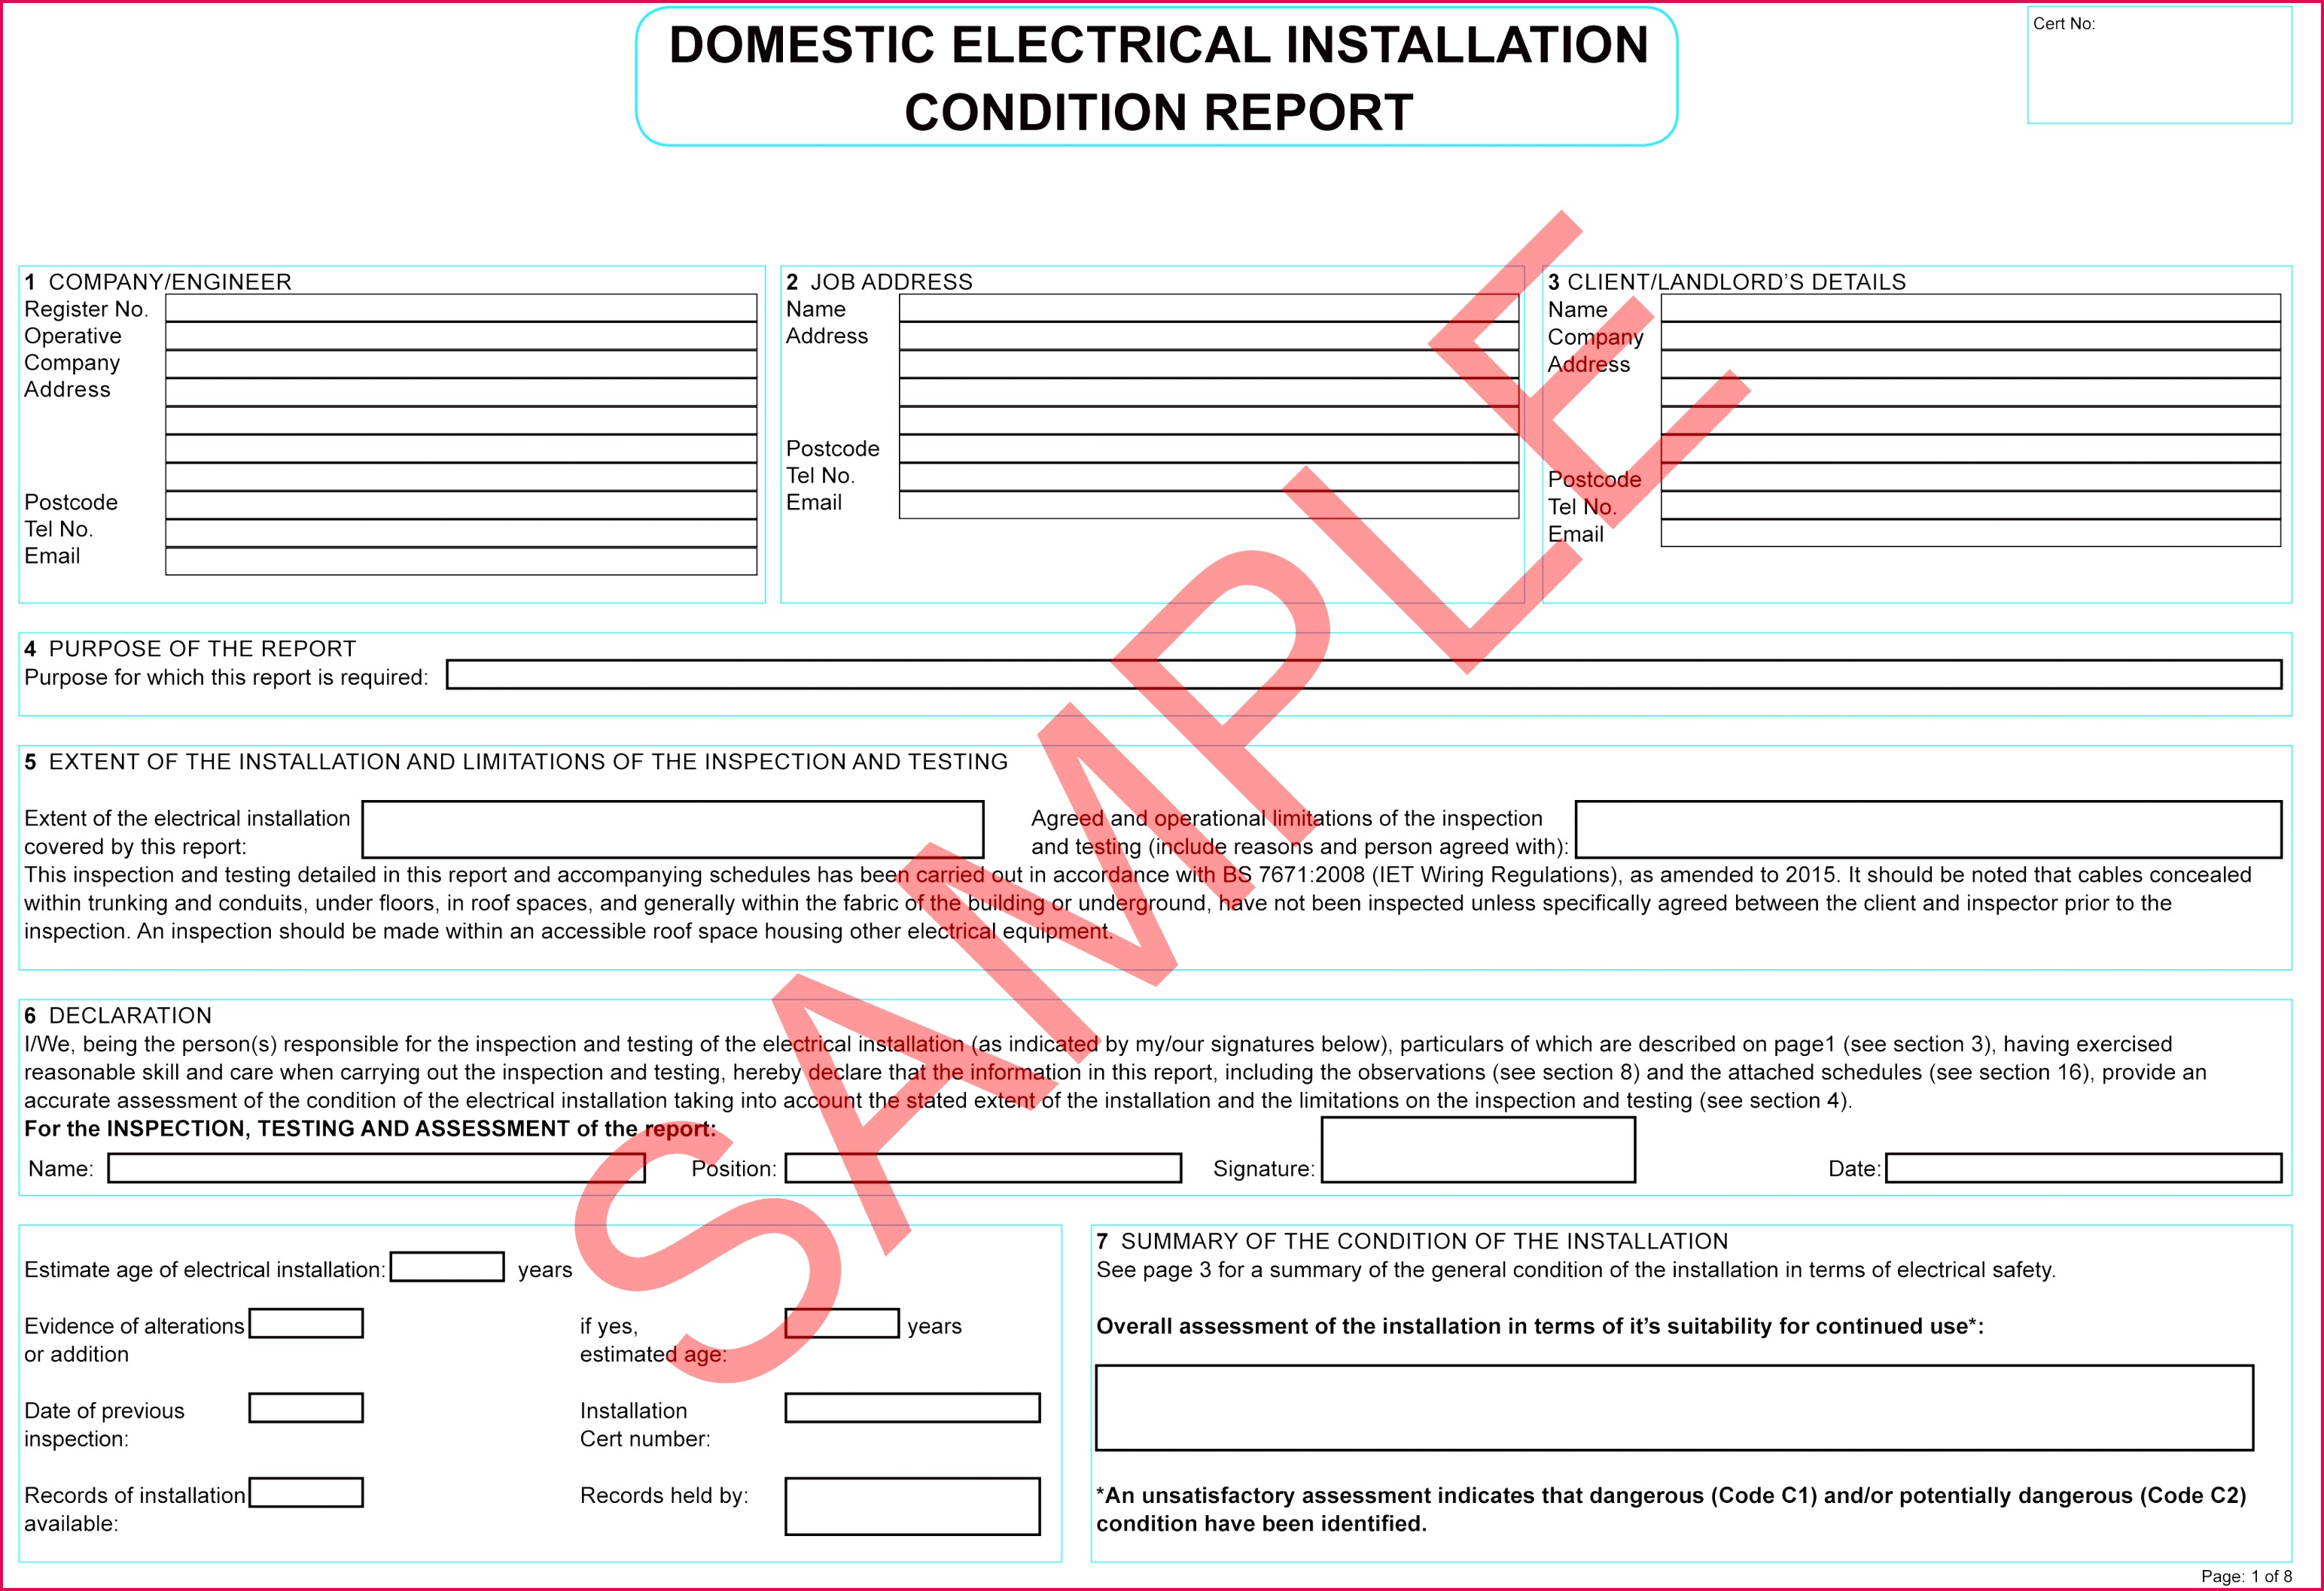 Domestic Electrical Installation Condition Report v5